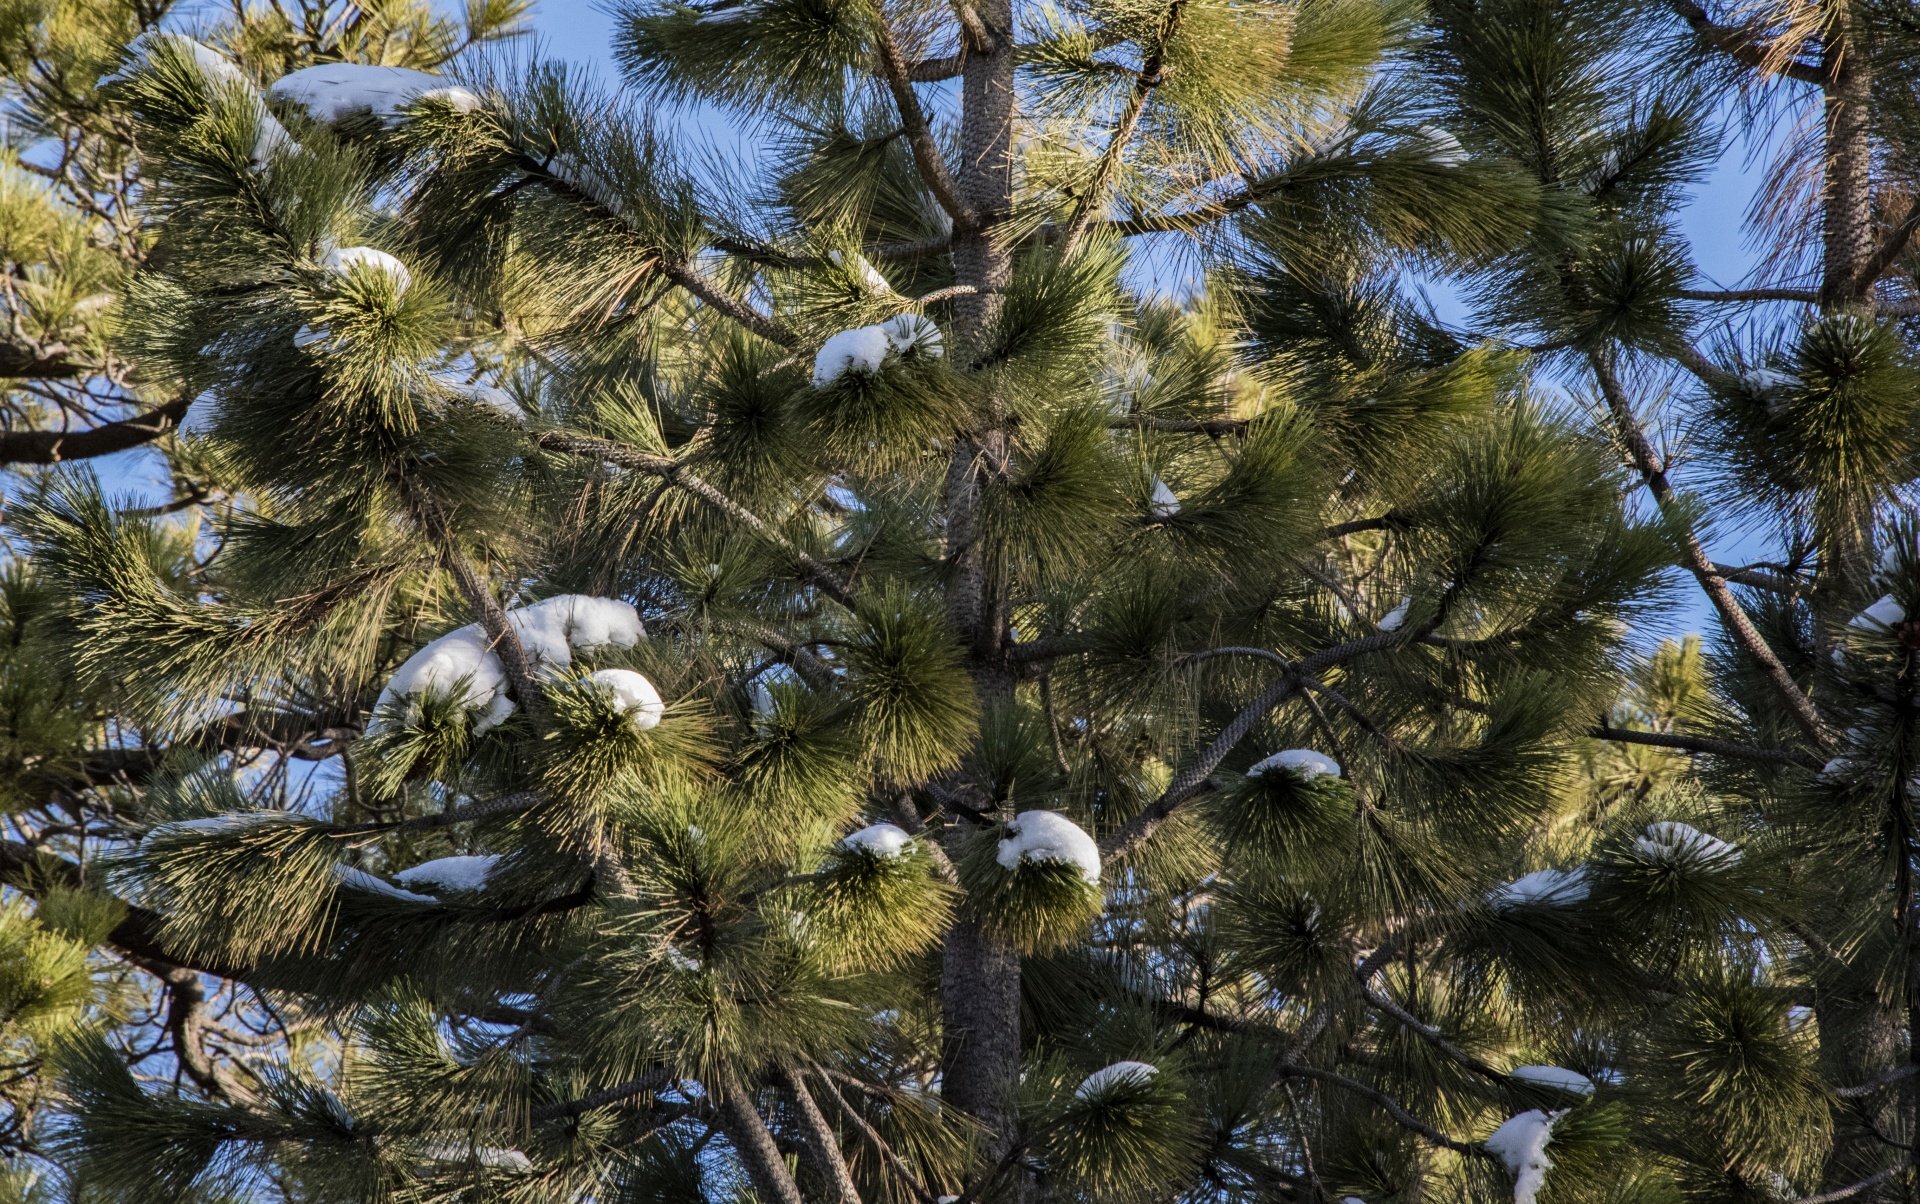 Green pine trees are dusted with snow in small piles on the branches